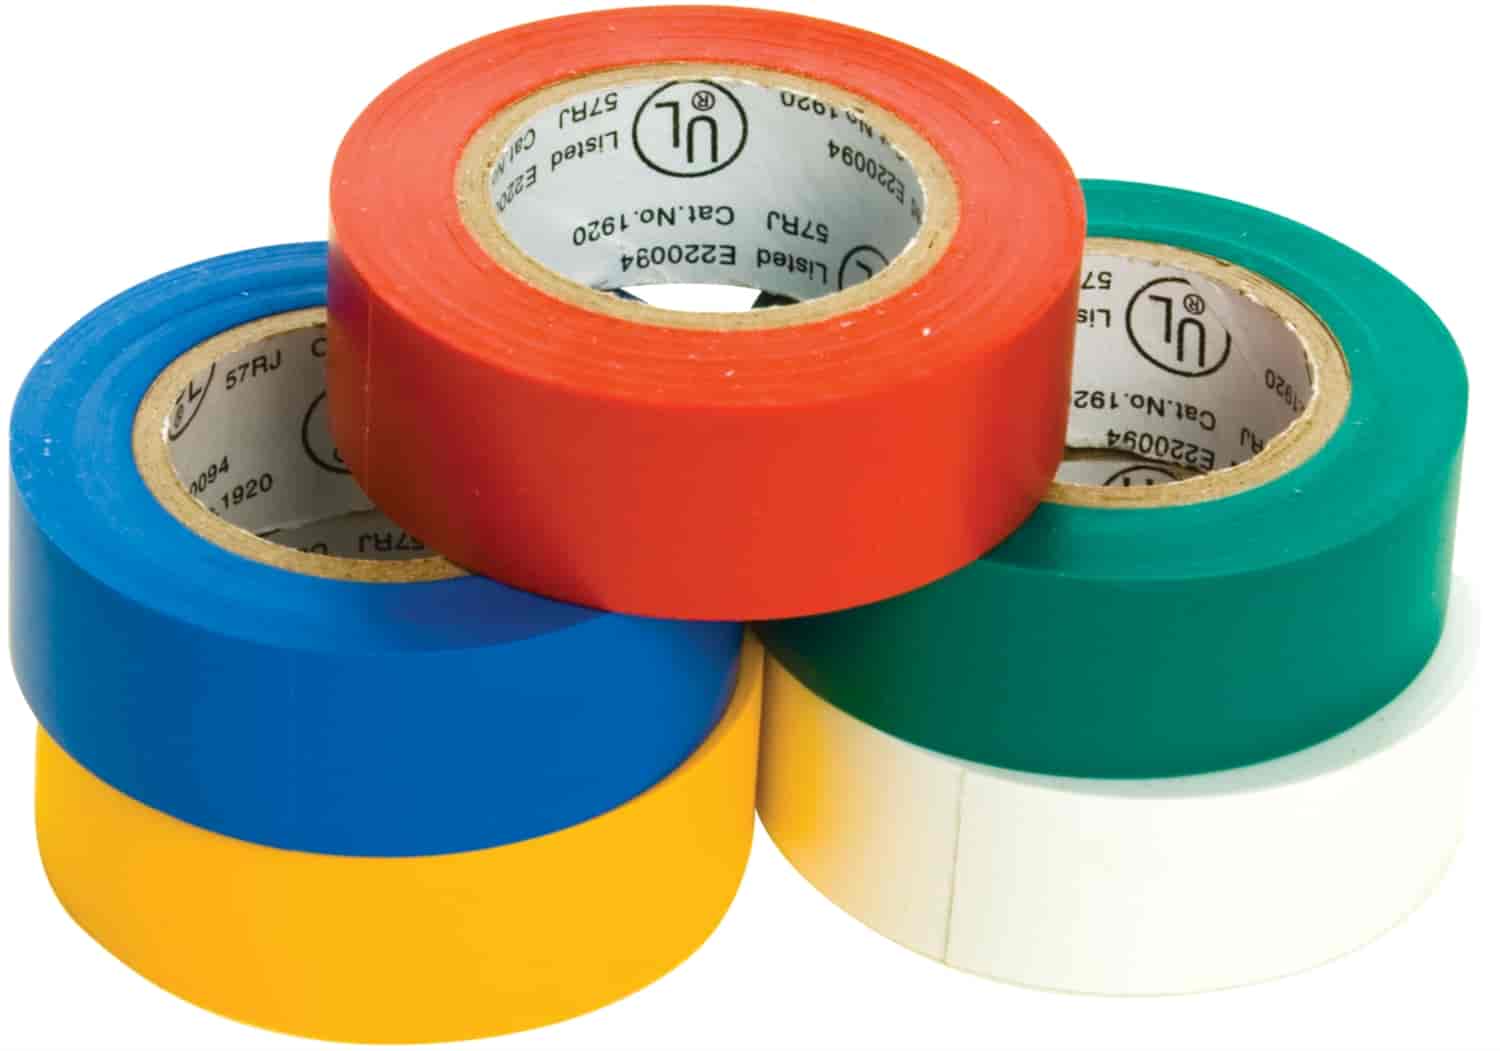 Colored Electrical Tape [5 pack]